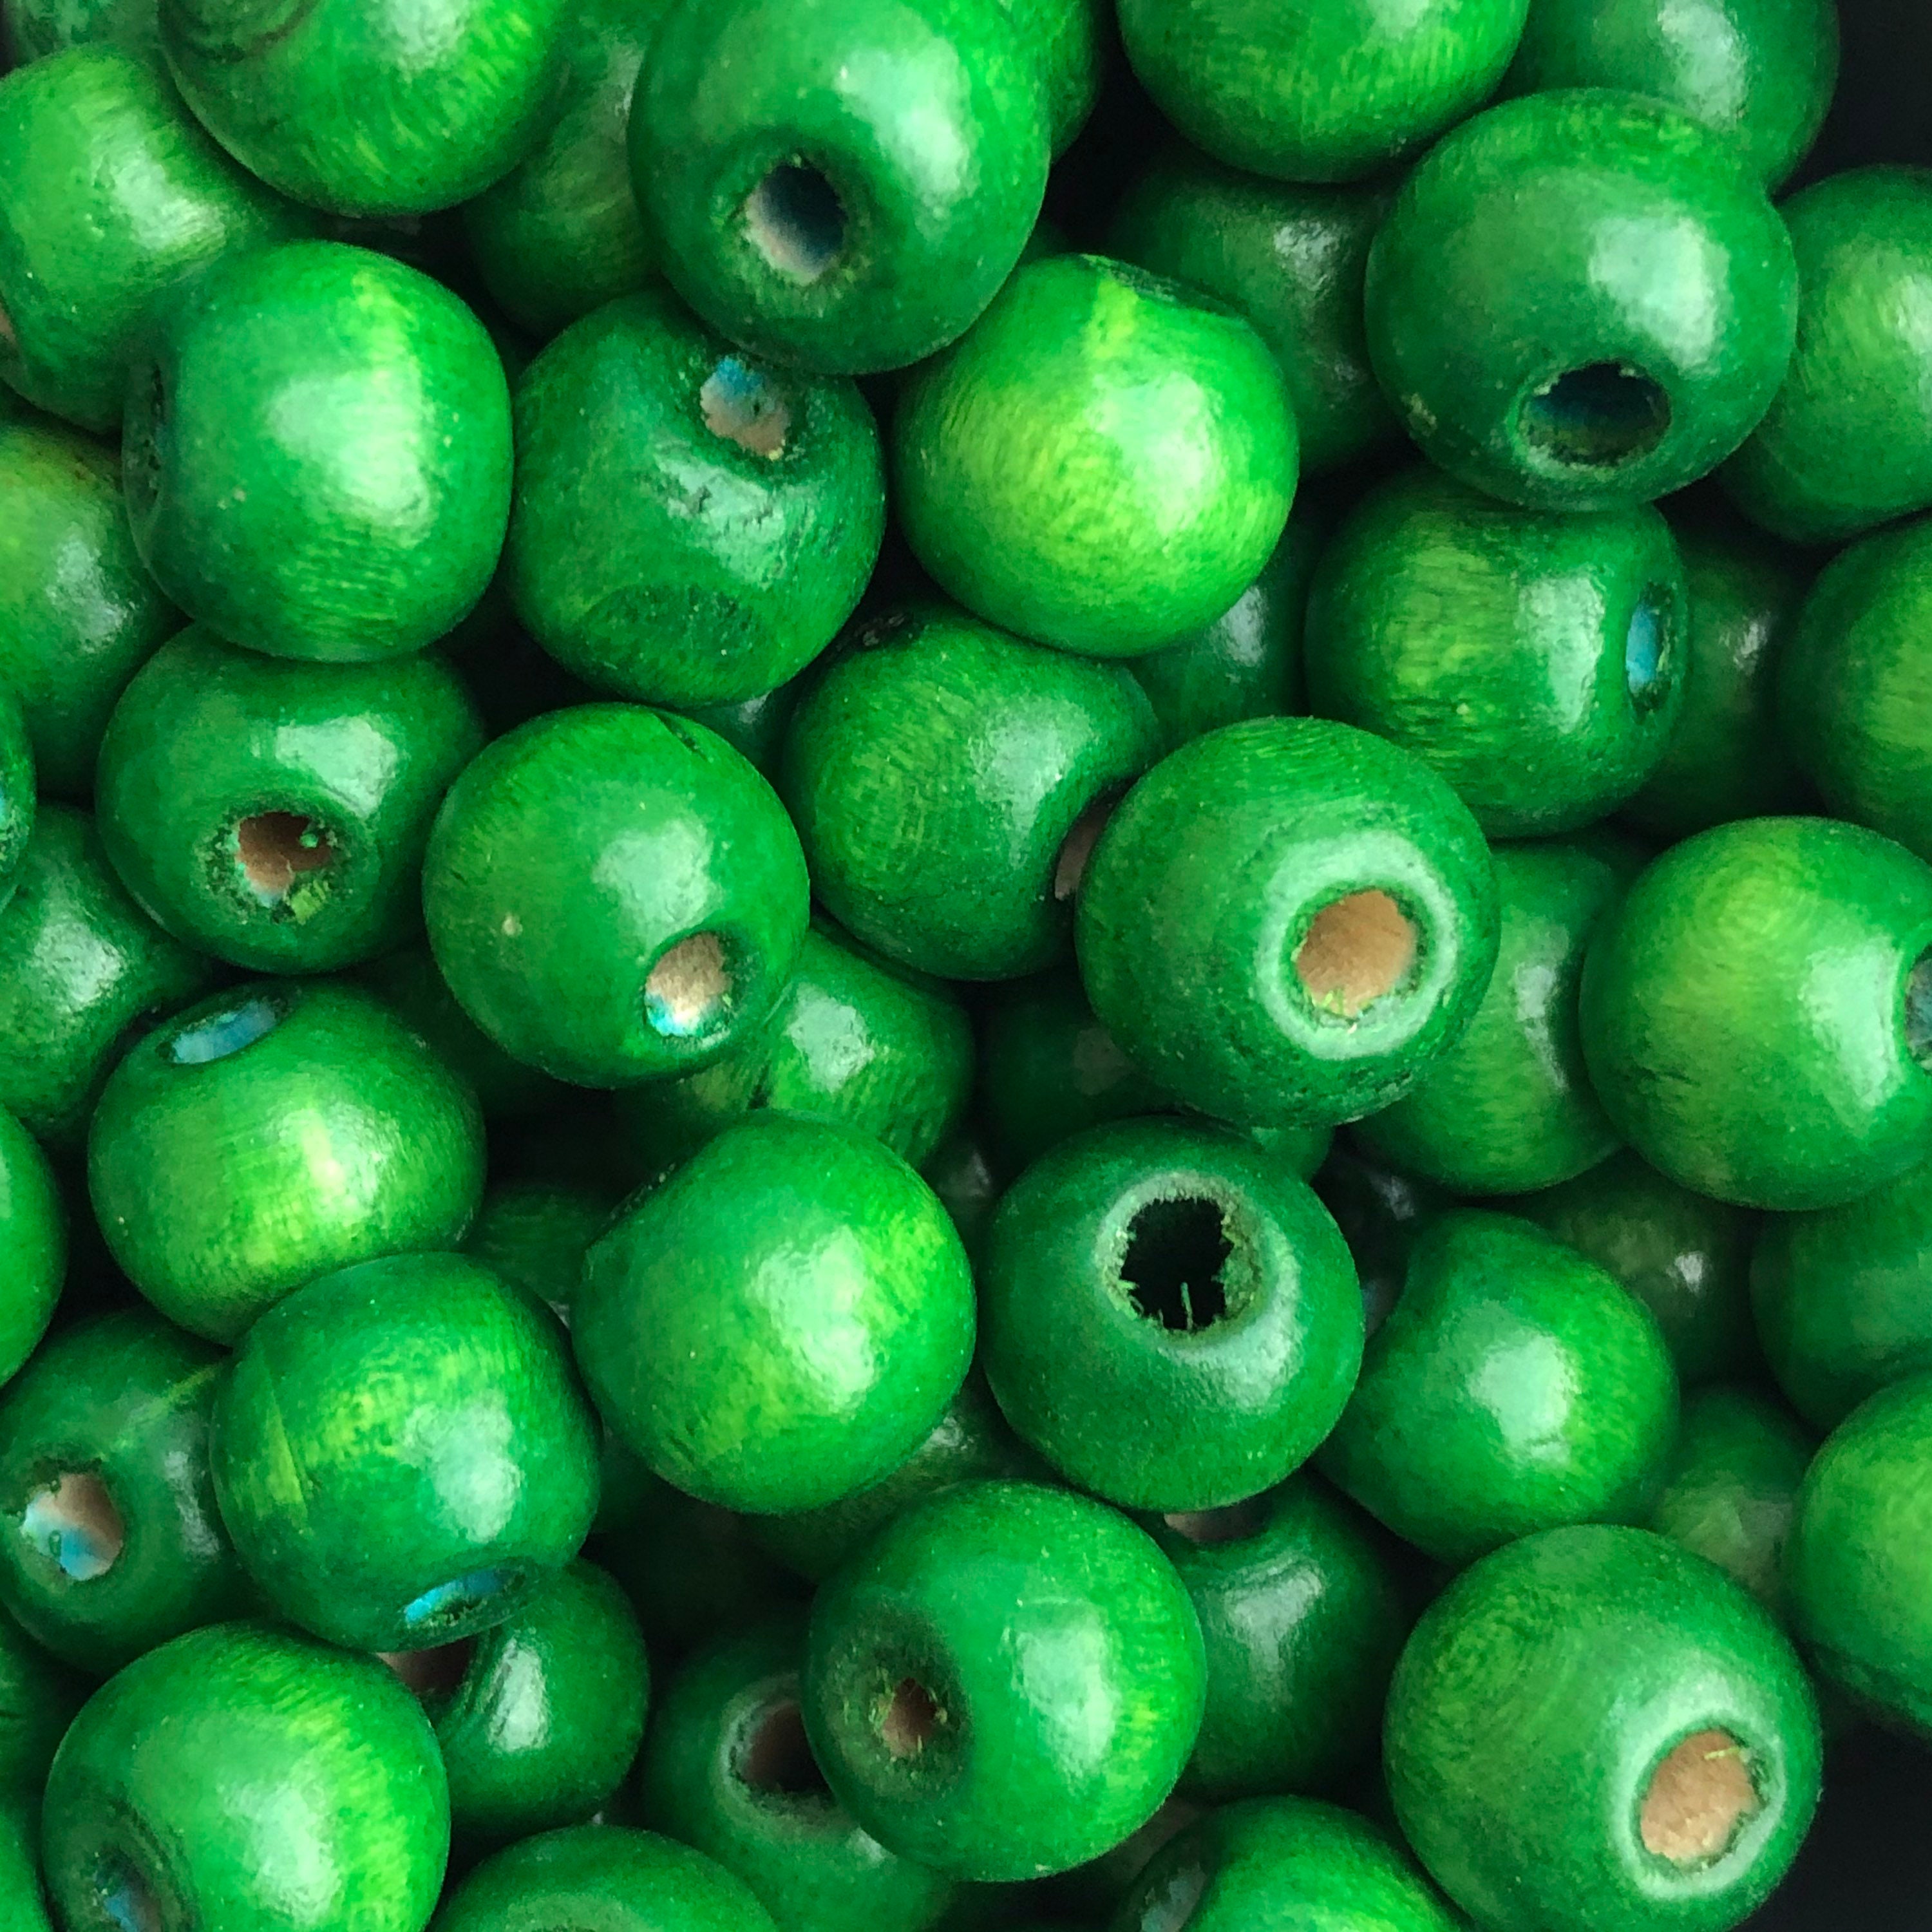 50pcs Natural Wood Bead, Round Wooden Beads, Green 12x10mm Smooth